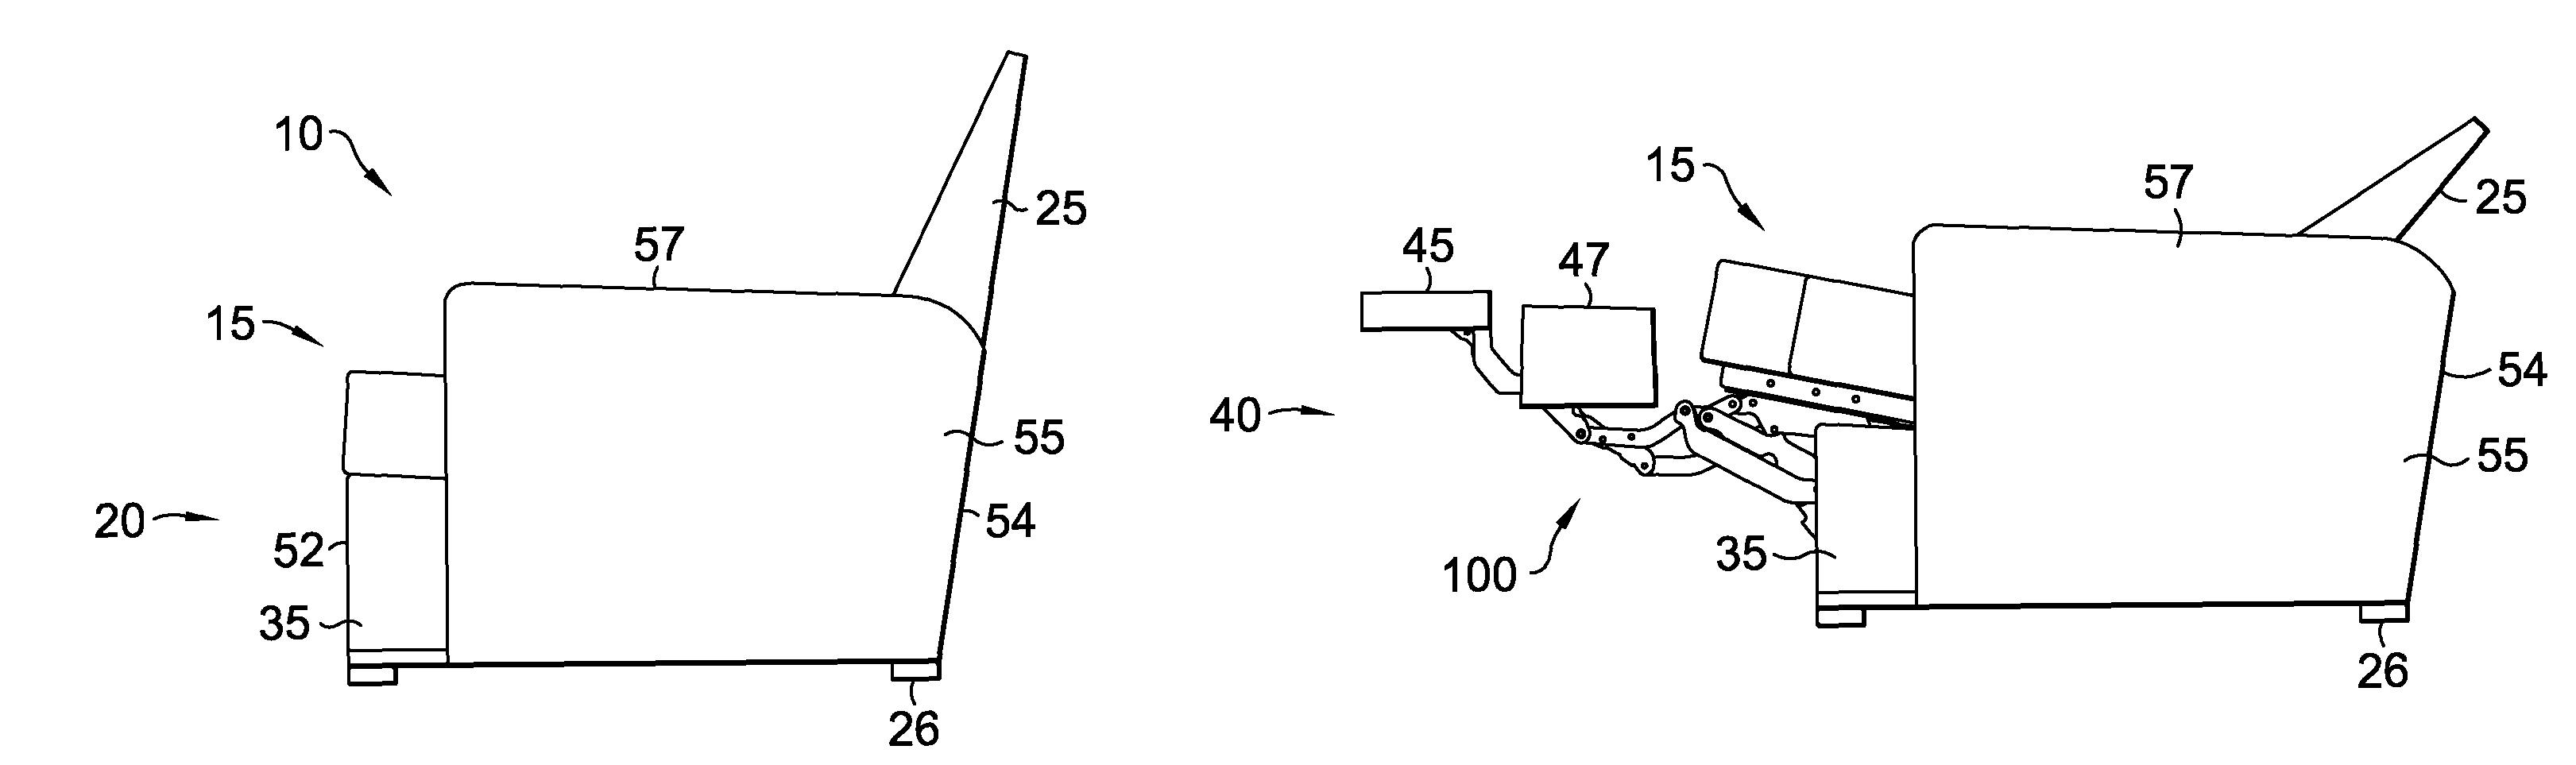 Zero-wall clearance linkage mechanism for providing additional layout